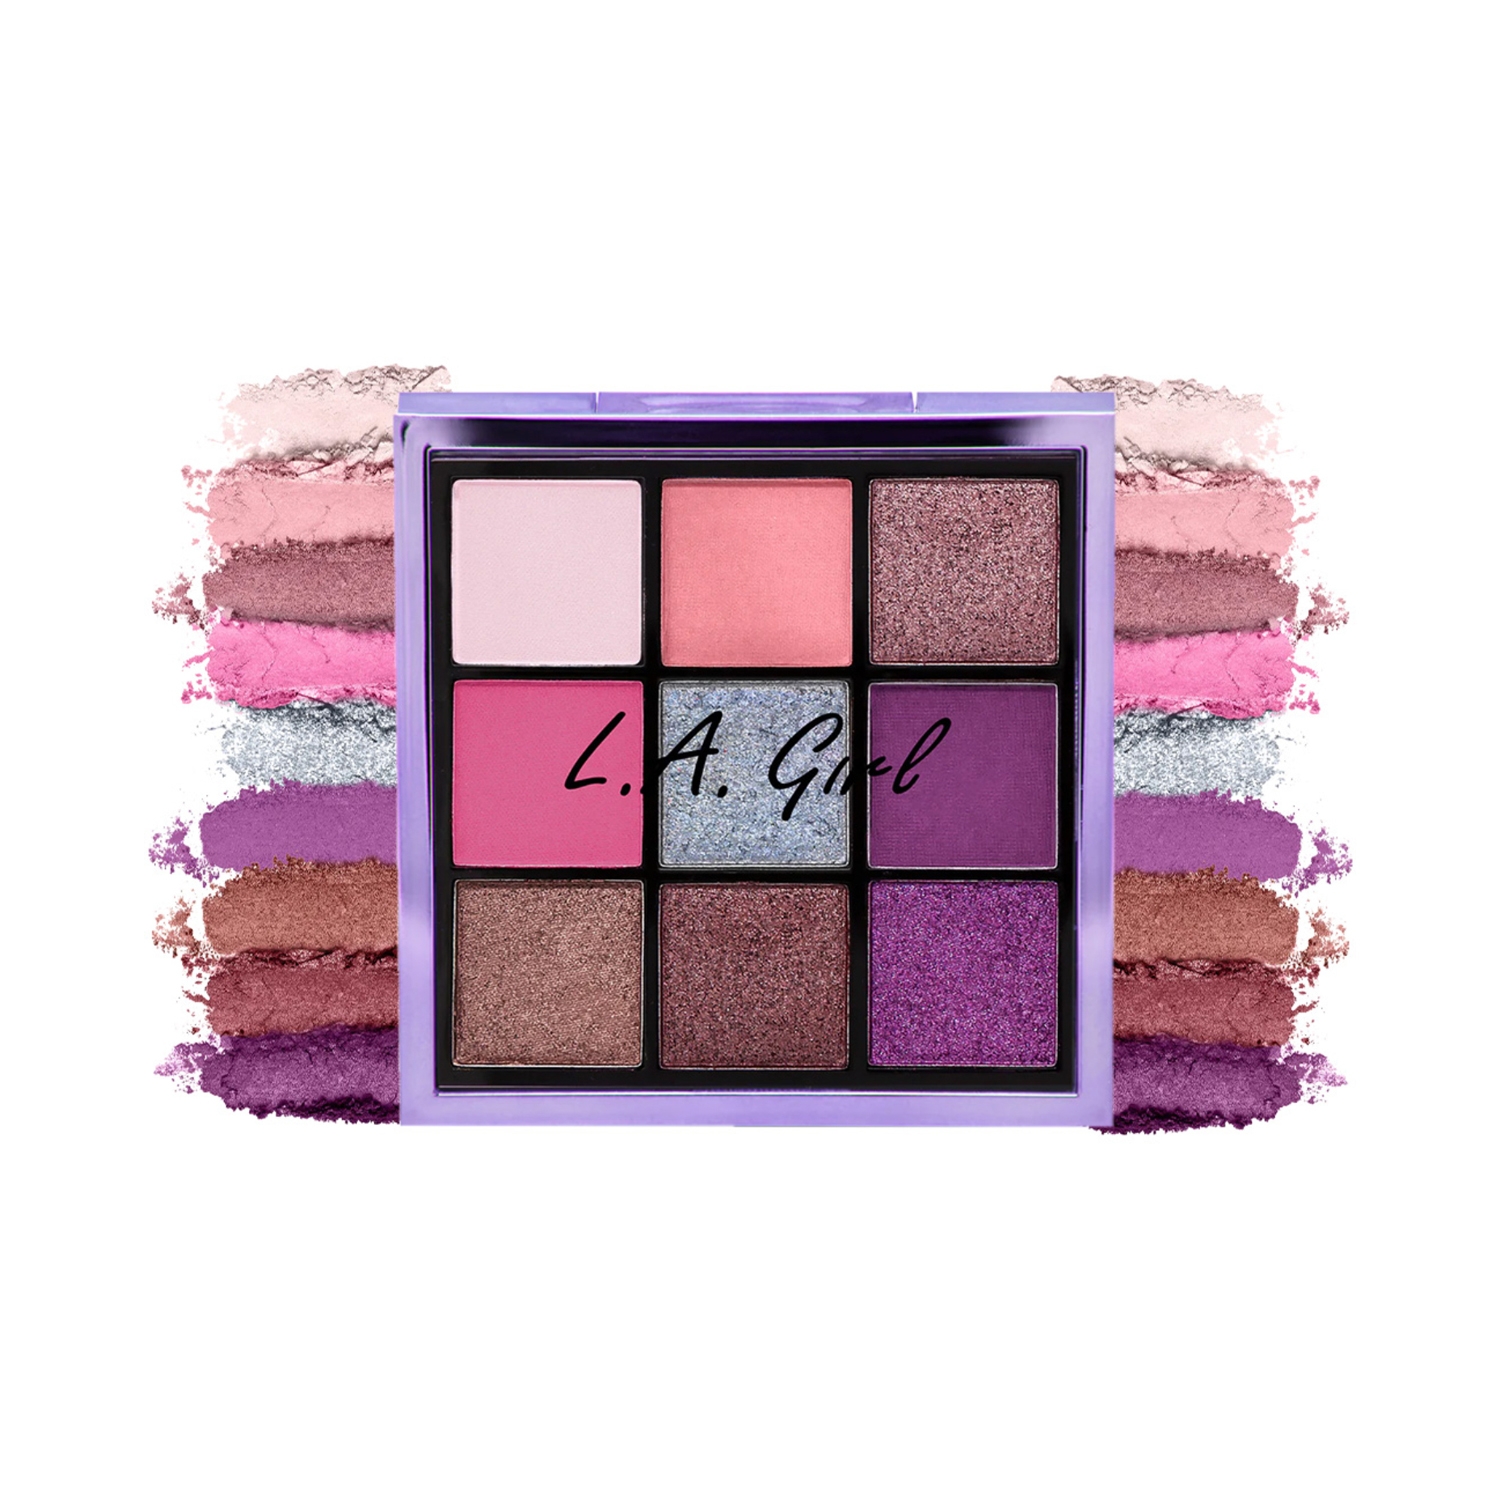 L.A. Girl | L.A. Girl Keep It Playful 9 Color Eyeshadow Palette - GES436 Playtime (14g)